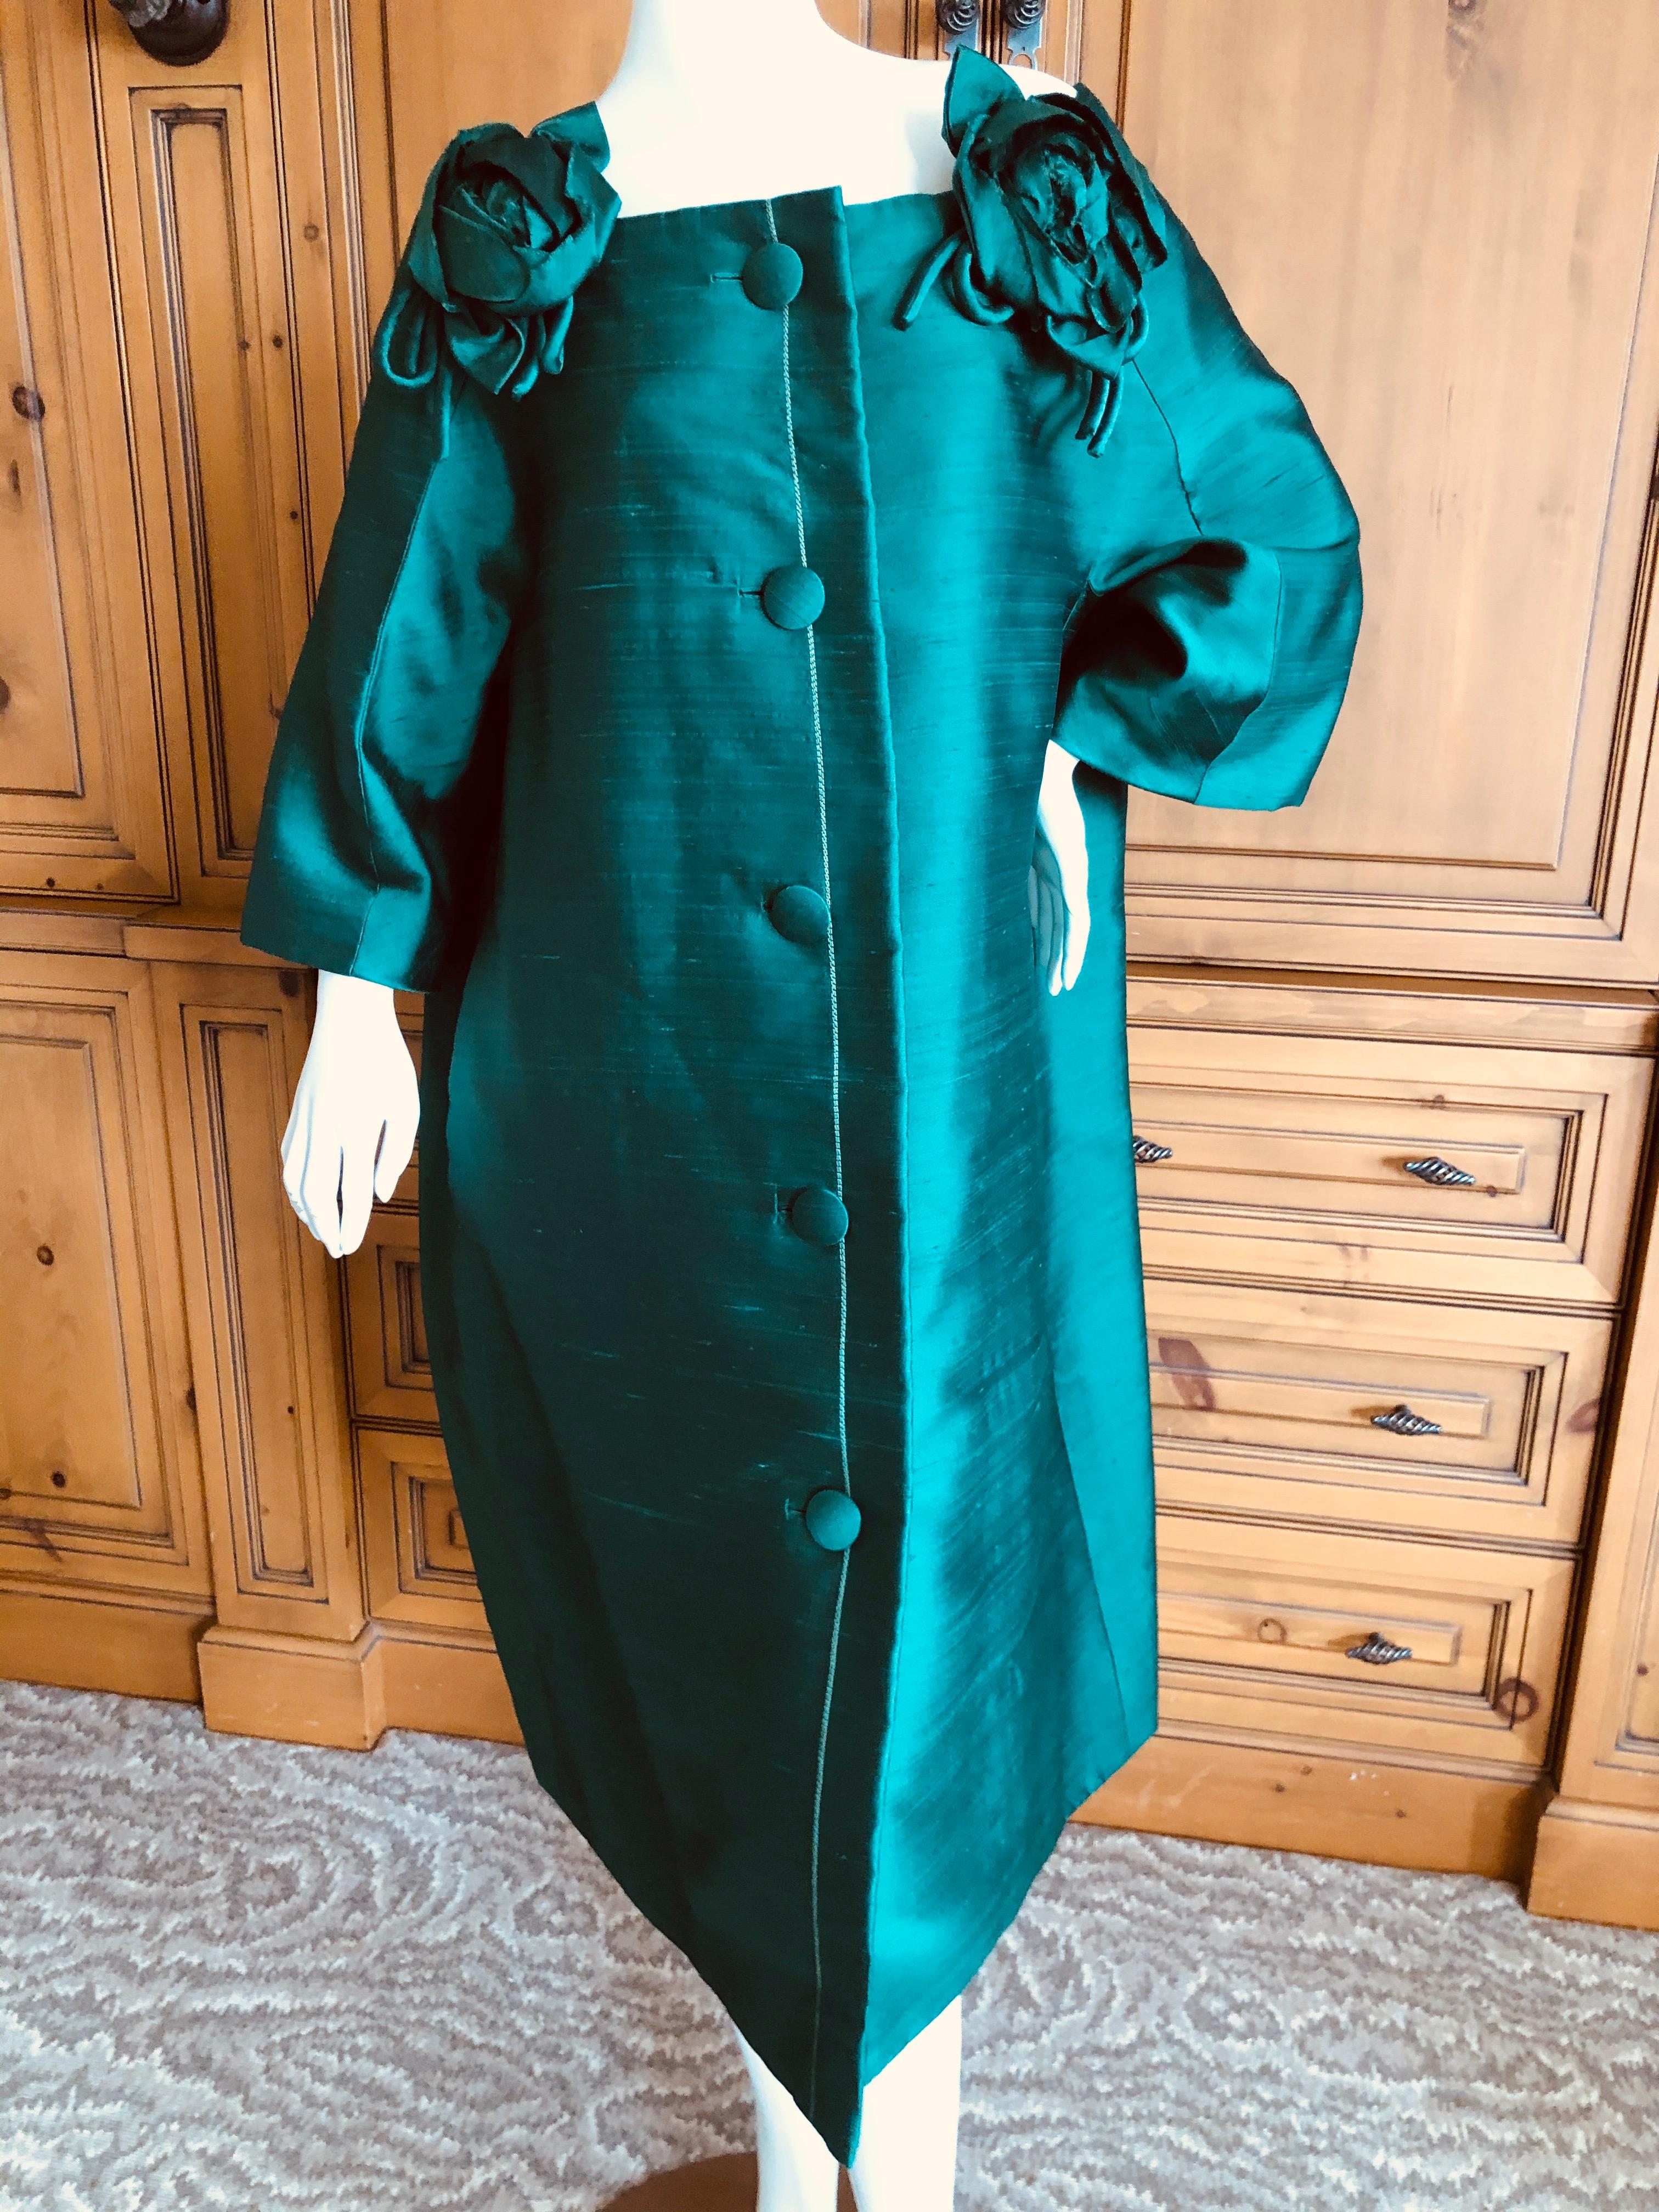 Christian Dior Printemps 1959 Numbered Haute Couture Coat by Yves Saint Laurent For Sale 12